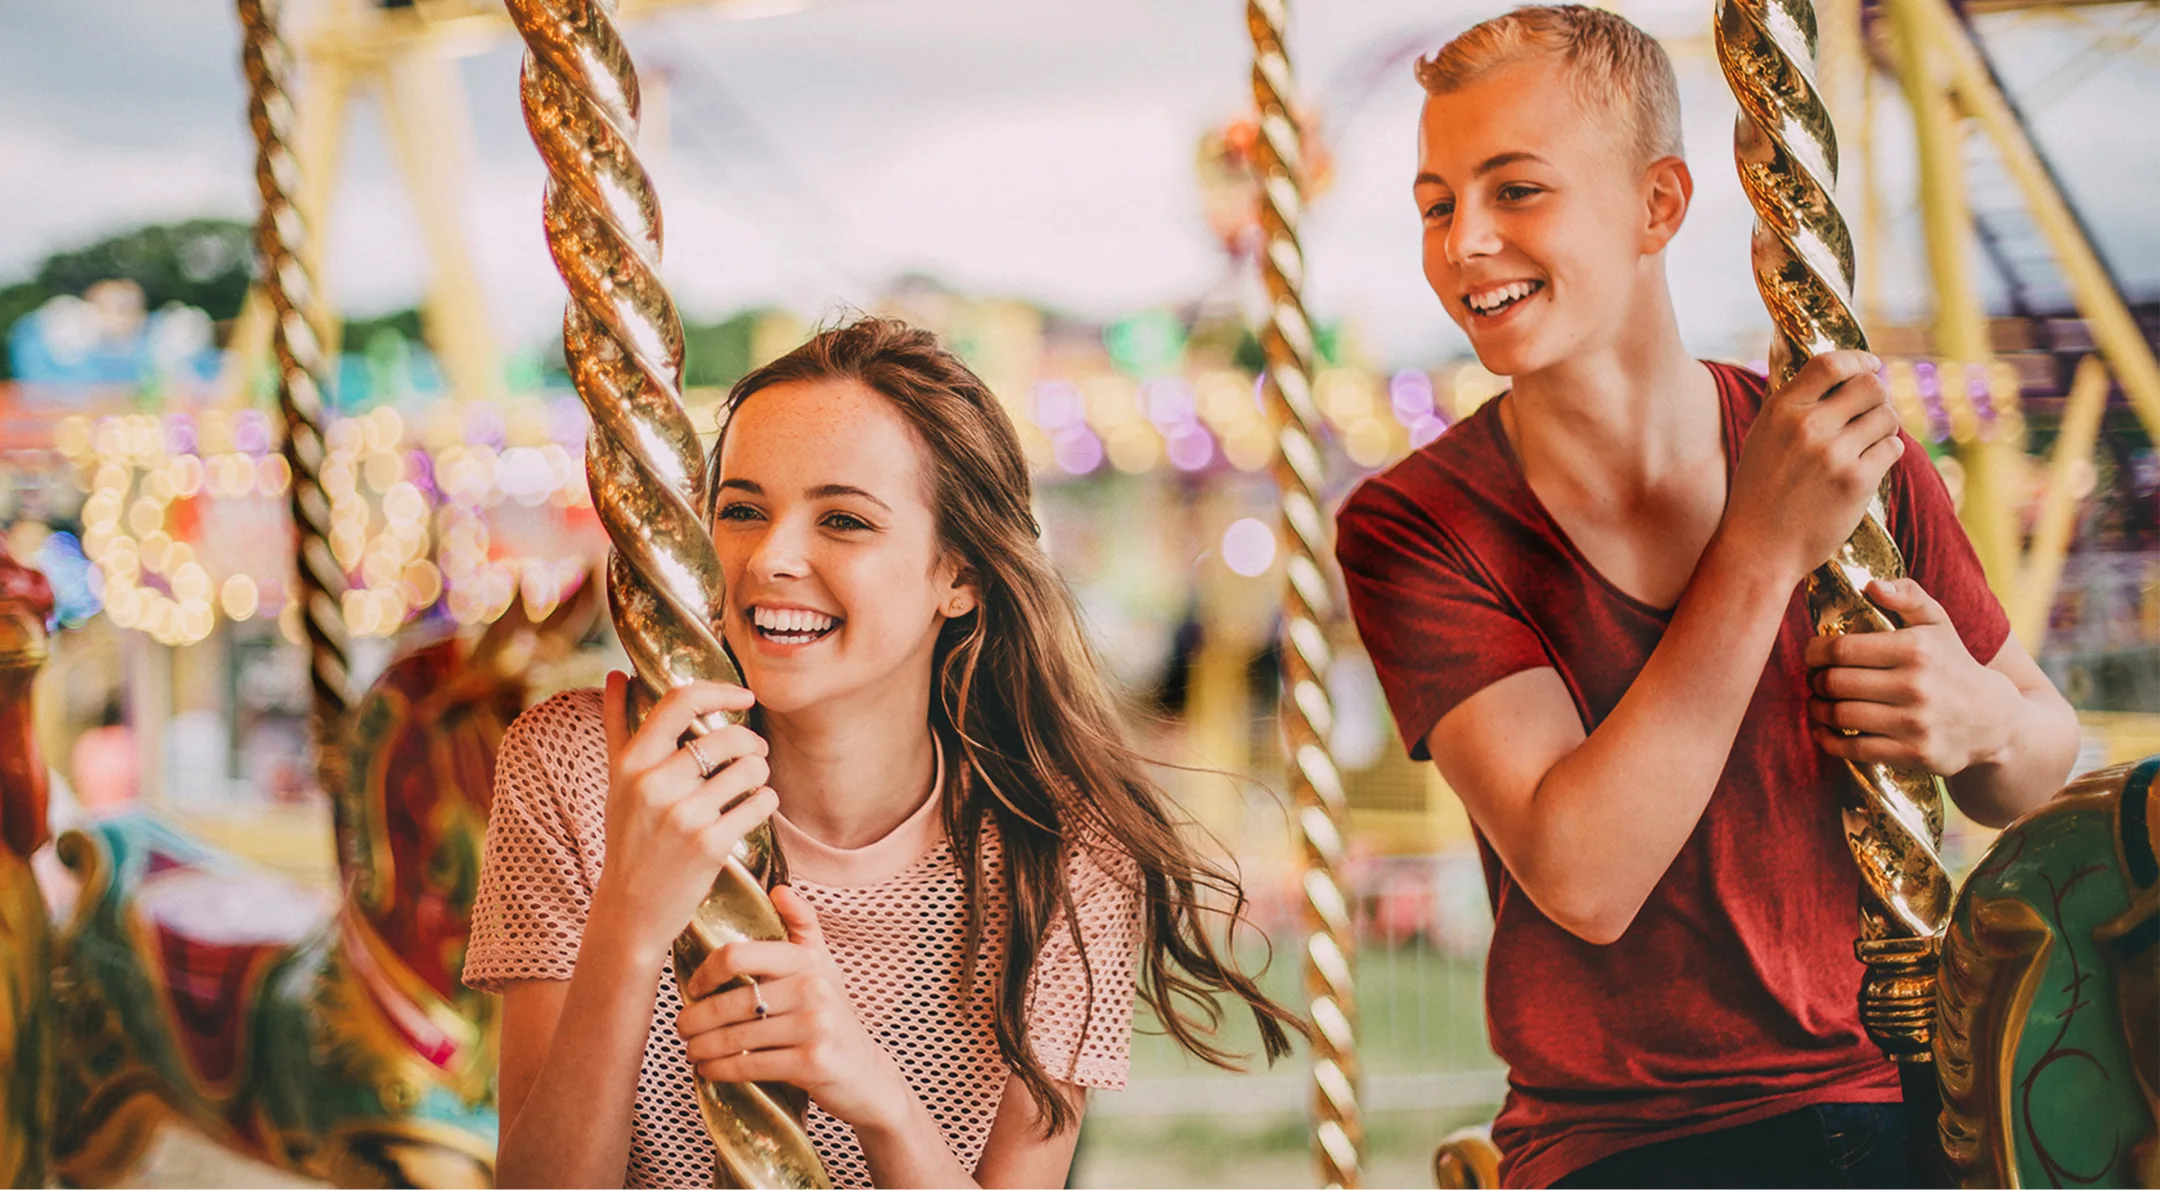 Two teenagers, smiling, riding a carousel. The phrase 'You learn, we care' is written over the image, visually interacting with them.